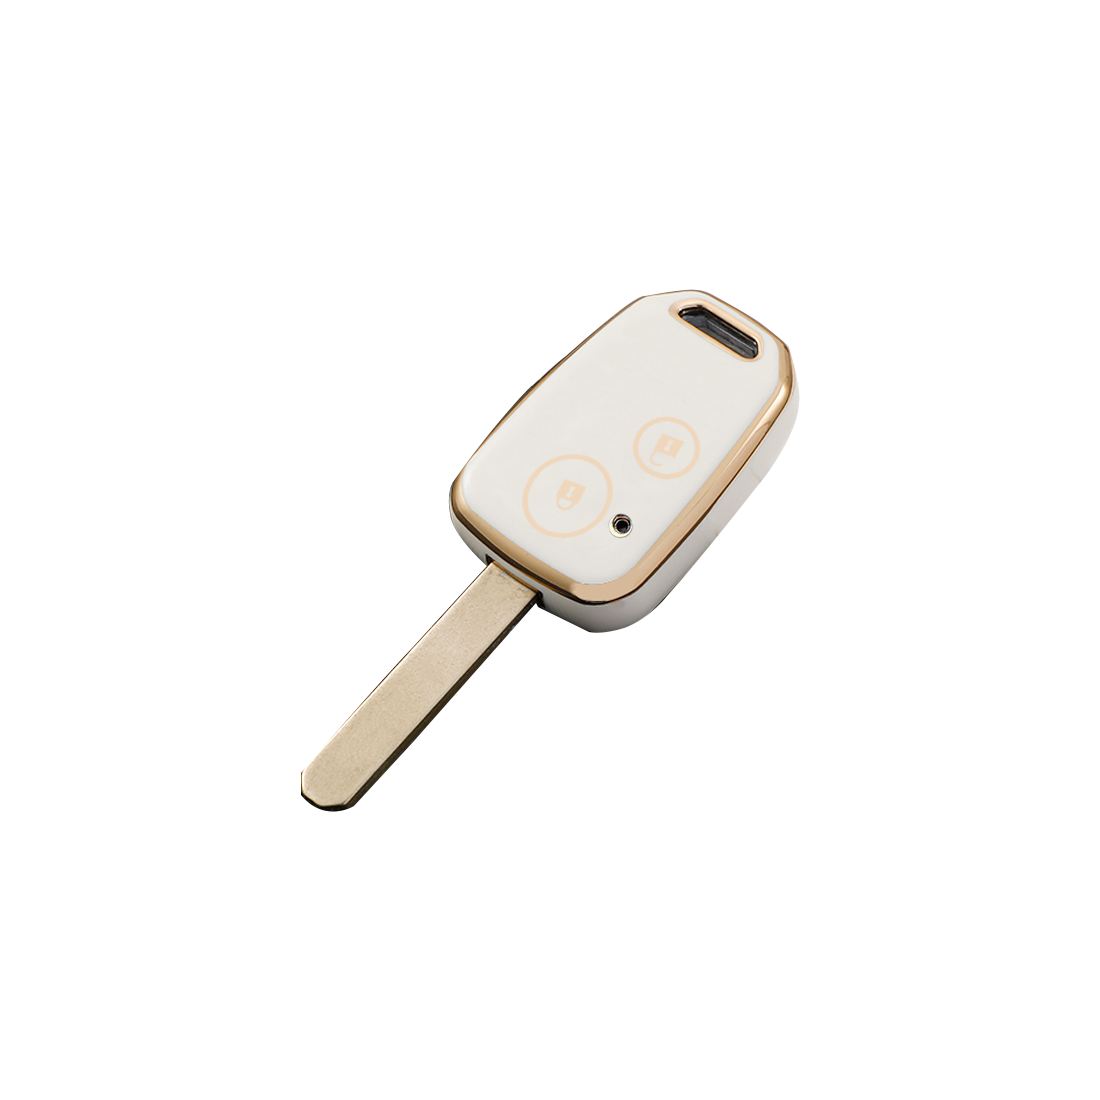 Acto TPU Gold Series Car Key Cover With TPU Gold Key Chain For Honda Brio